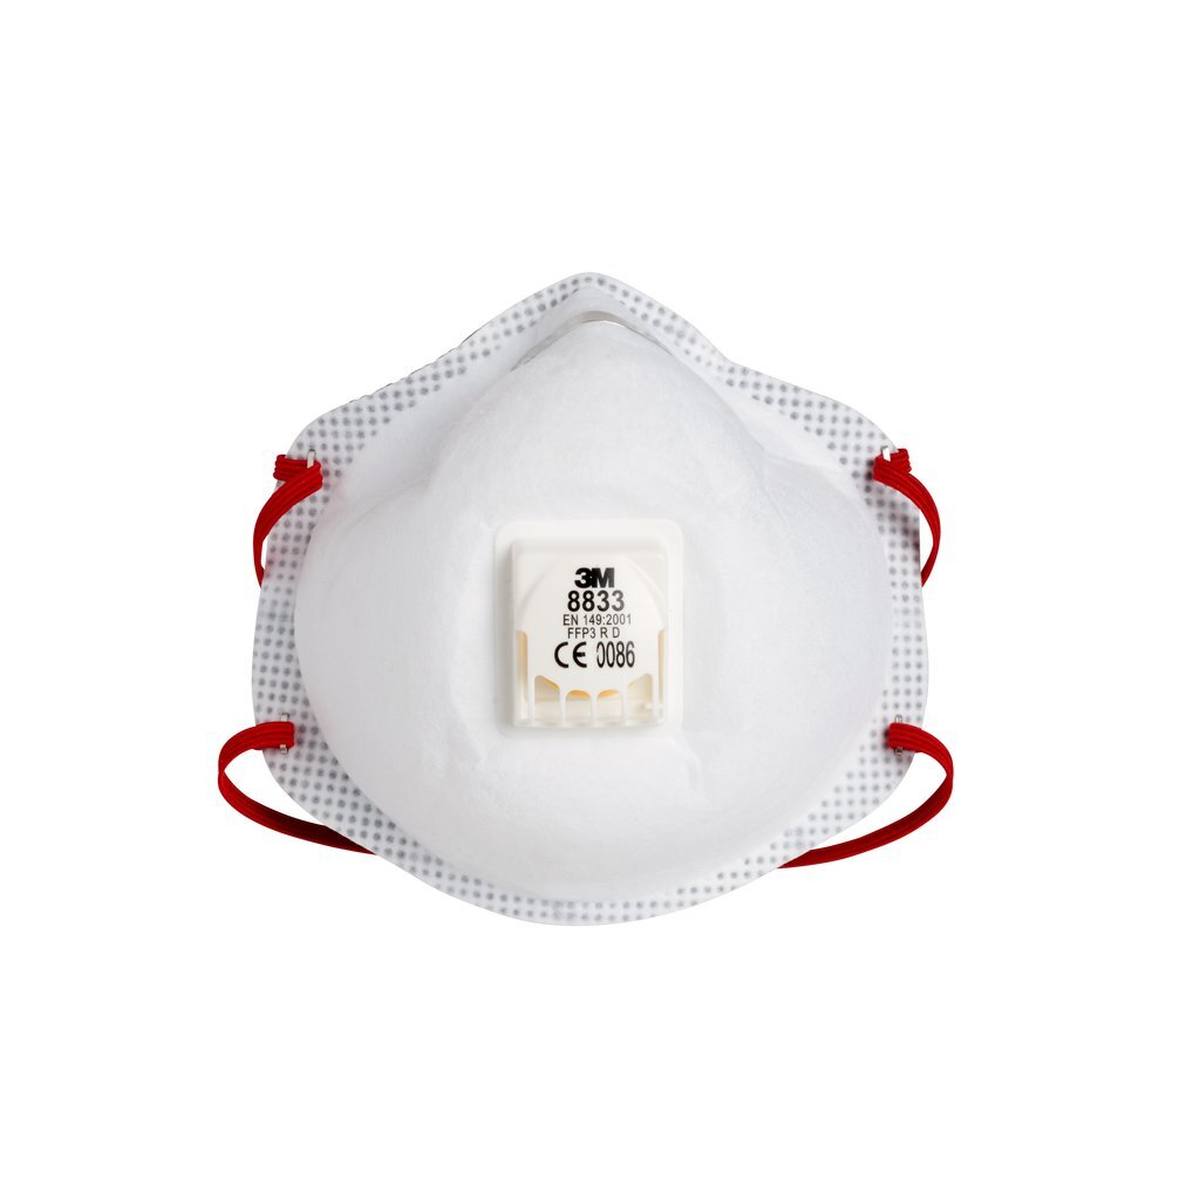 3M 8833SV Respirator FFP3 with cool-flow exhalation valve, up to 30 times the limit value, small pack